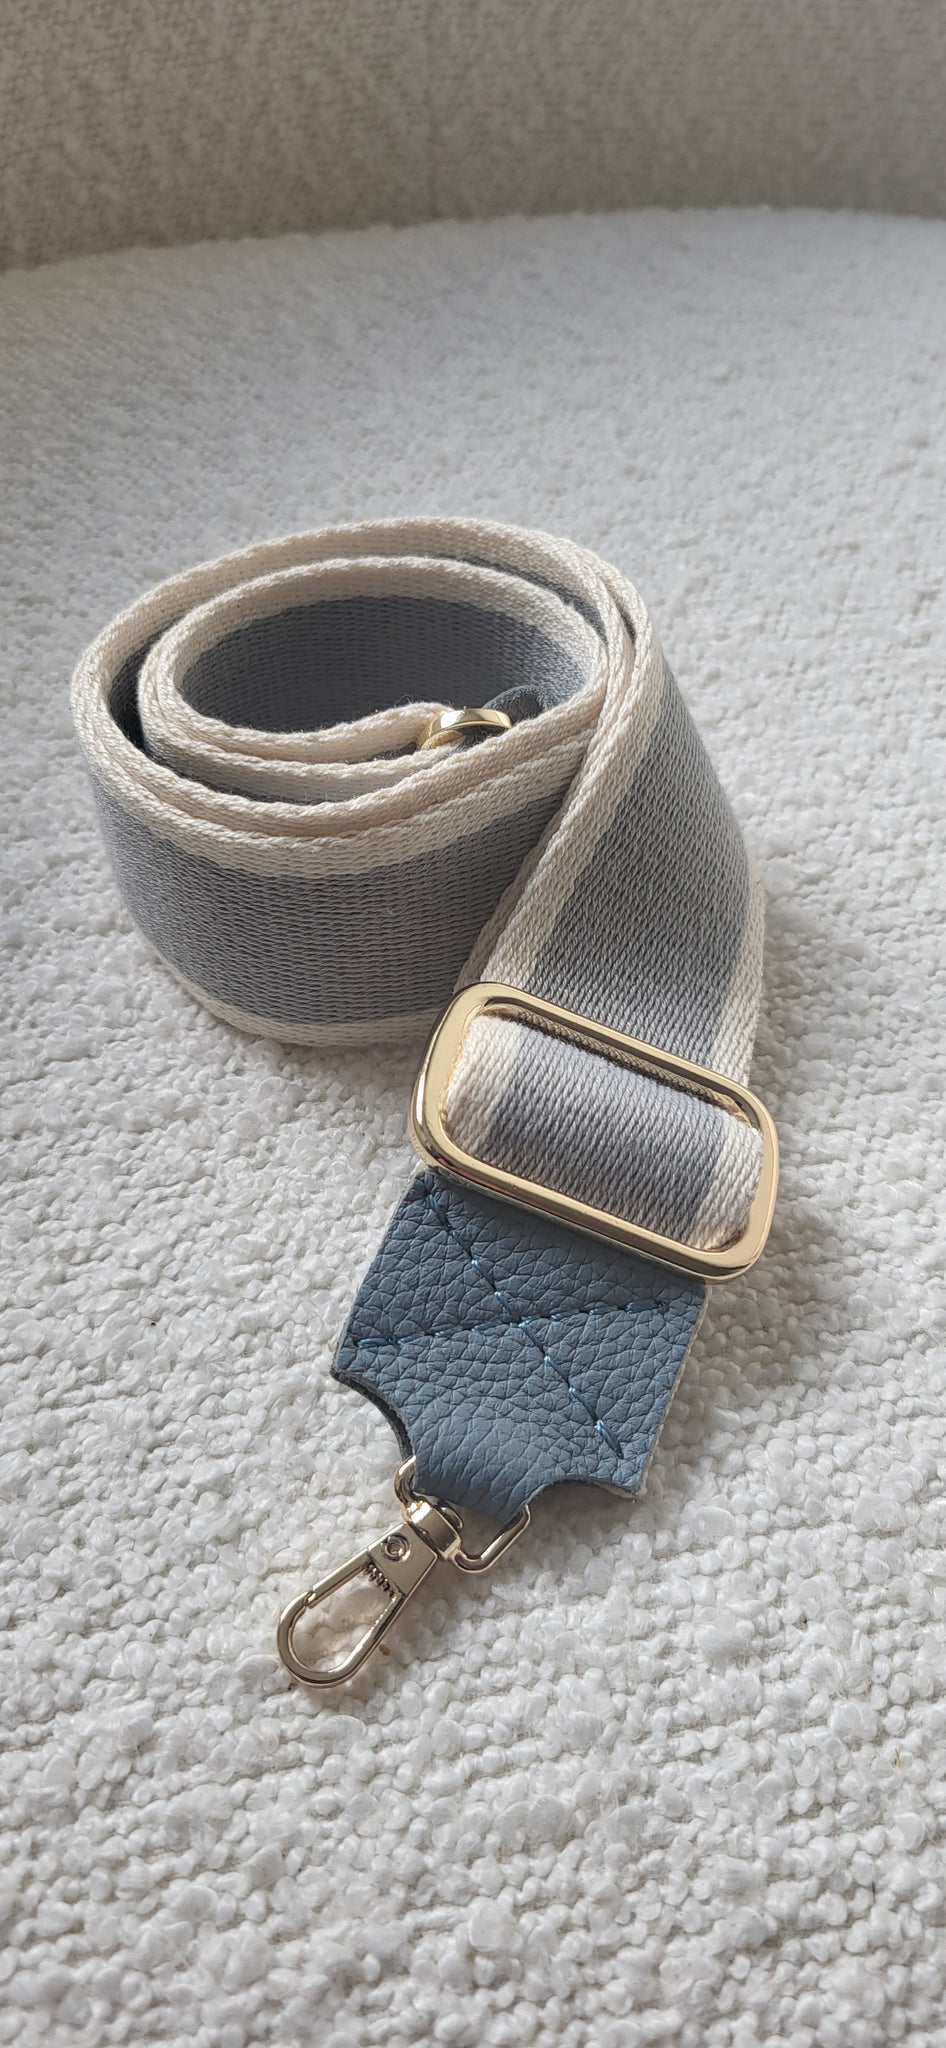 Light blue and ivory strap